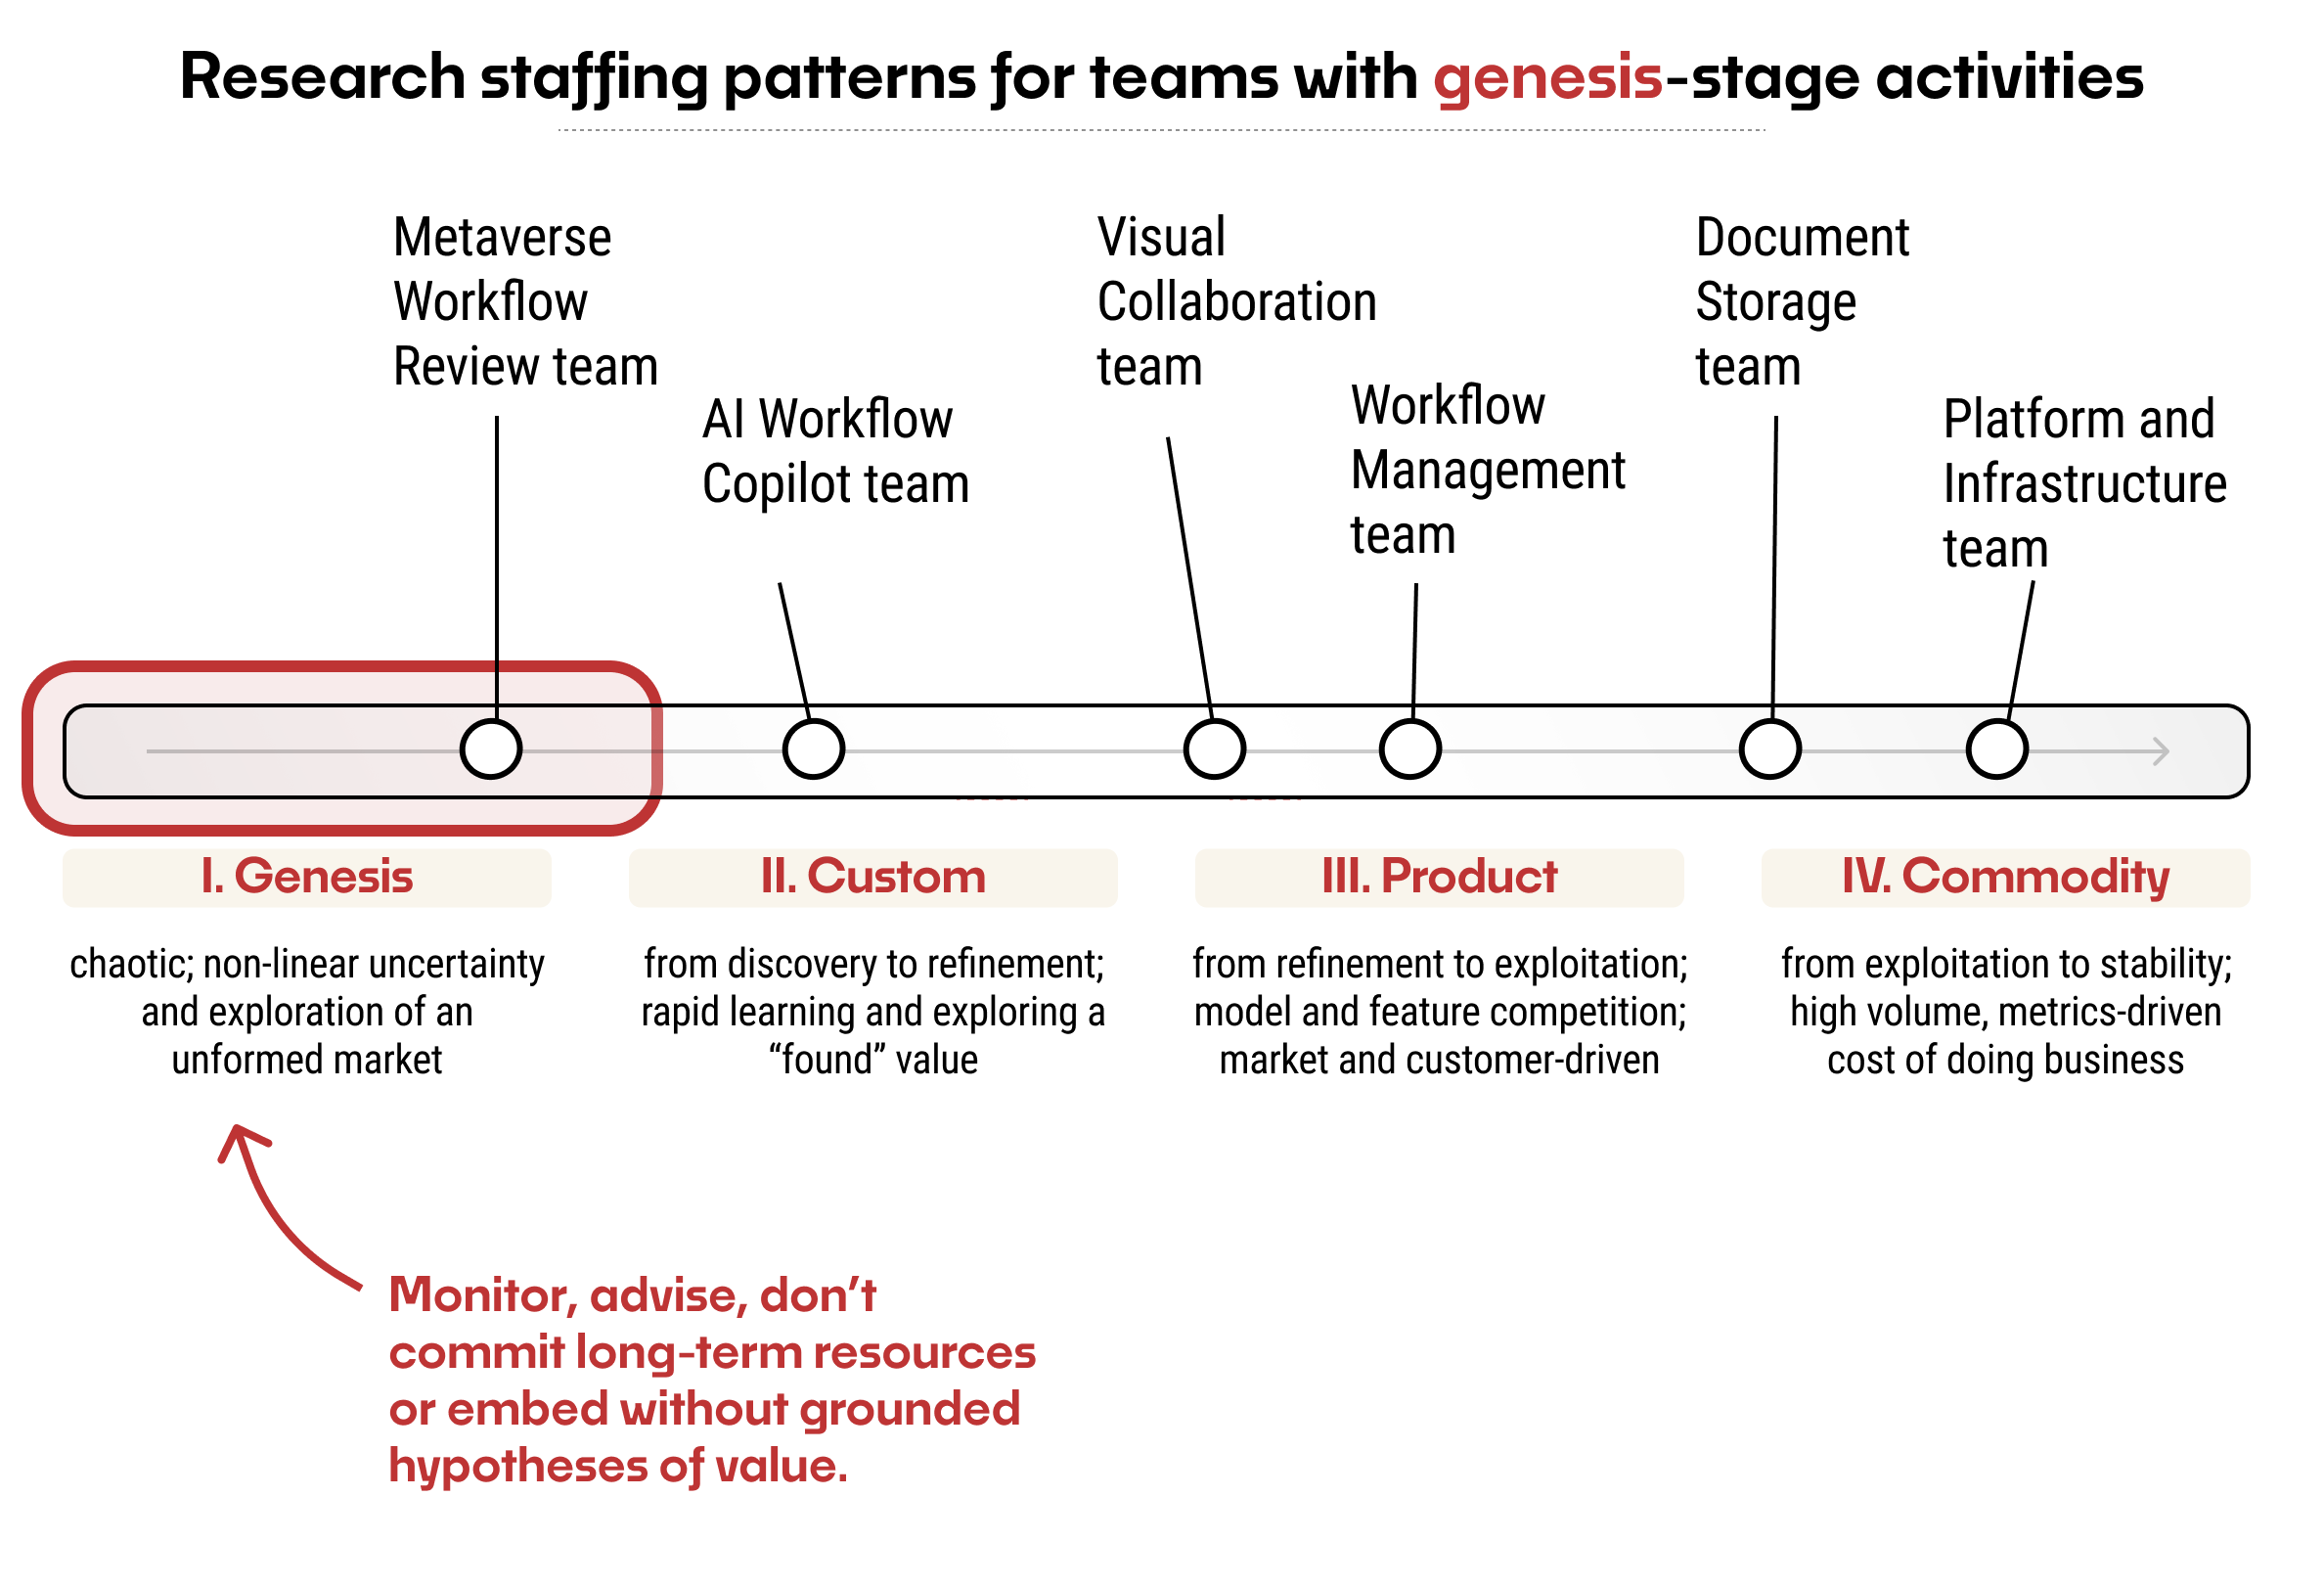 The same spectrum of teams as above, with the Genesis stage highlighted, and a recommendation to: Monitor and advise, don't commit long-term resources or embed without grounded hypotheses of value.